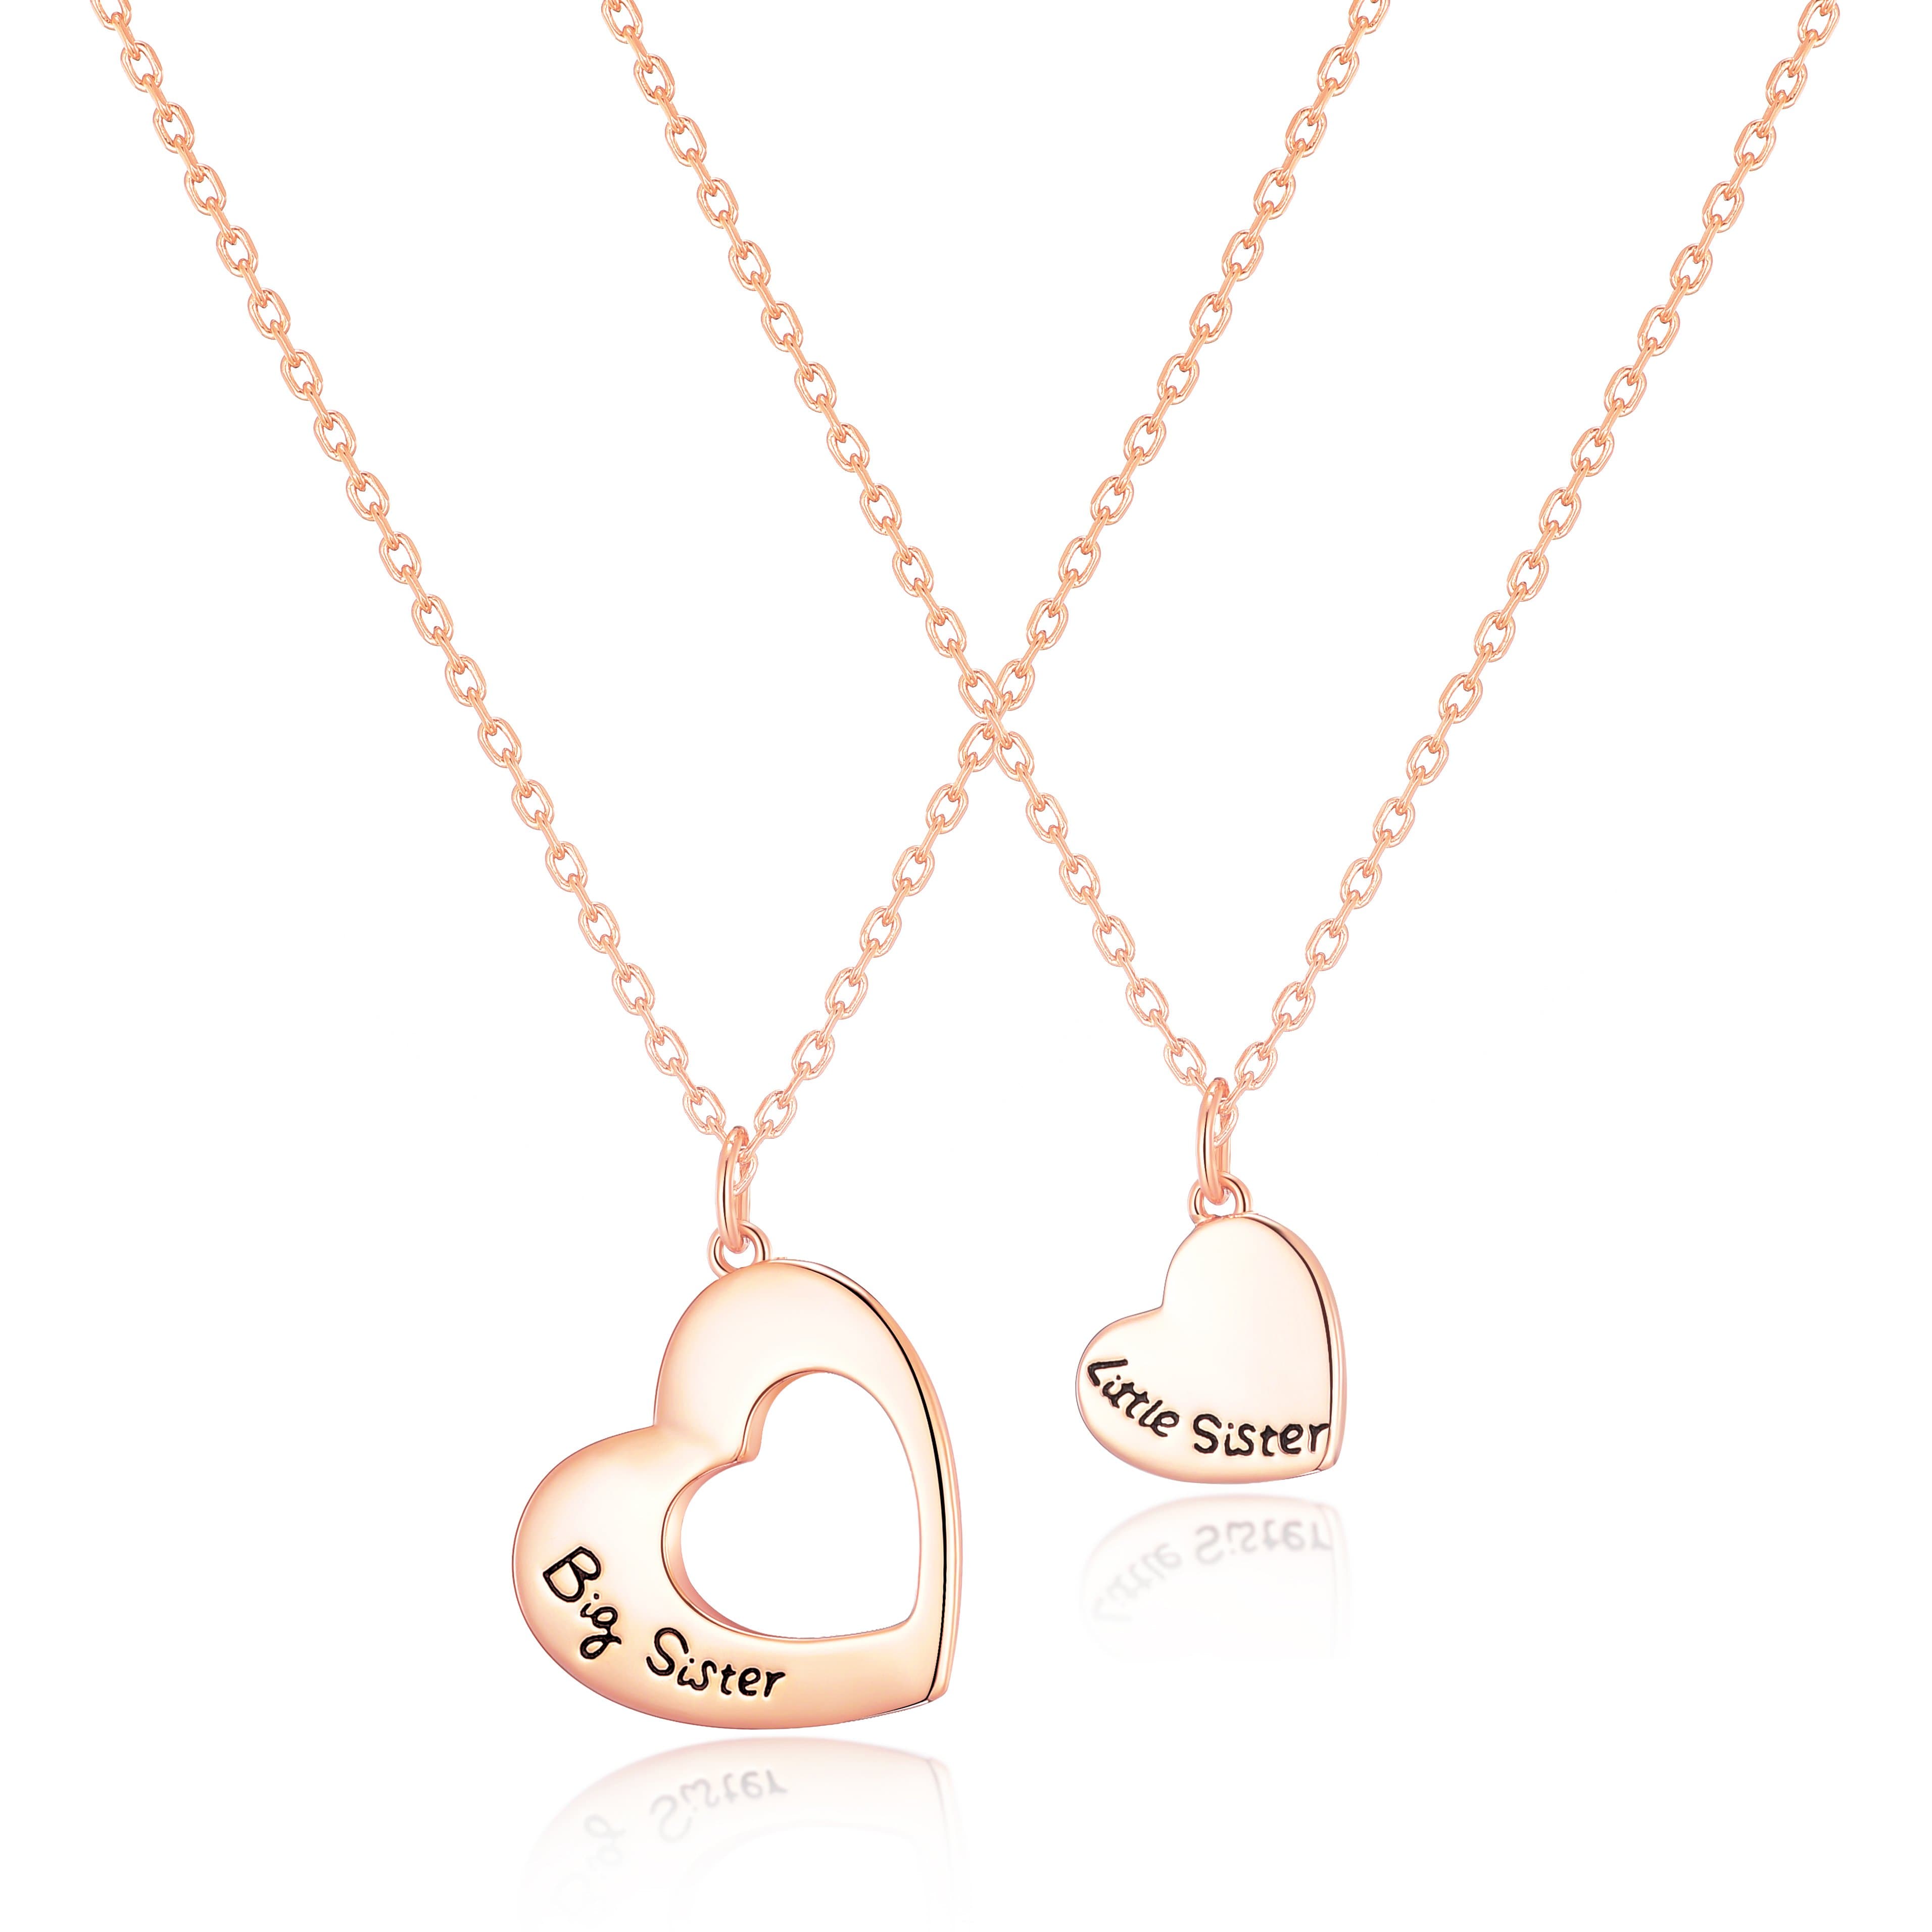 Rose Gold Plated Big Sister and Little Sister Necklace Set by Philip Jones Jewellery